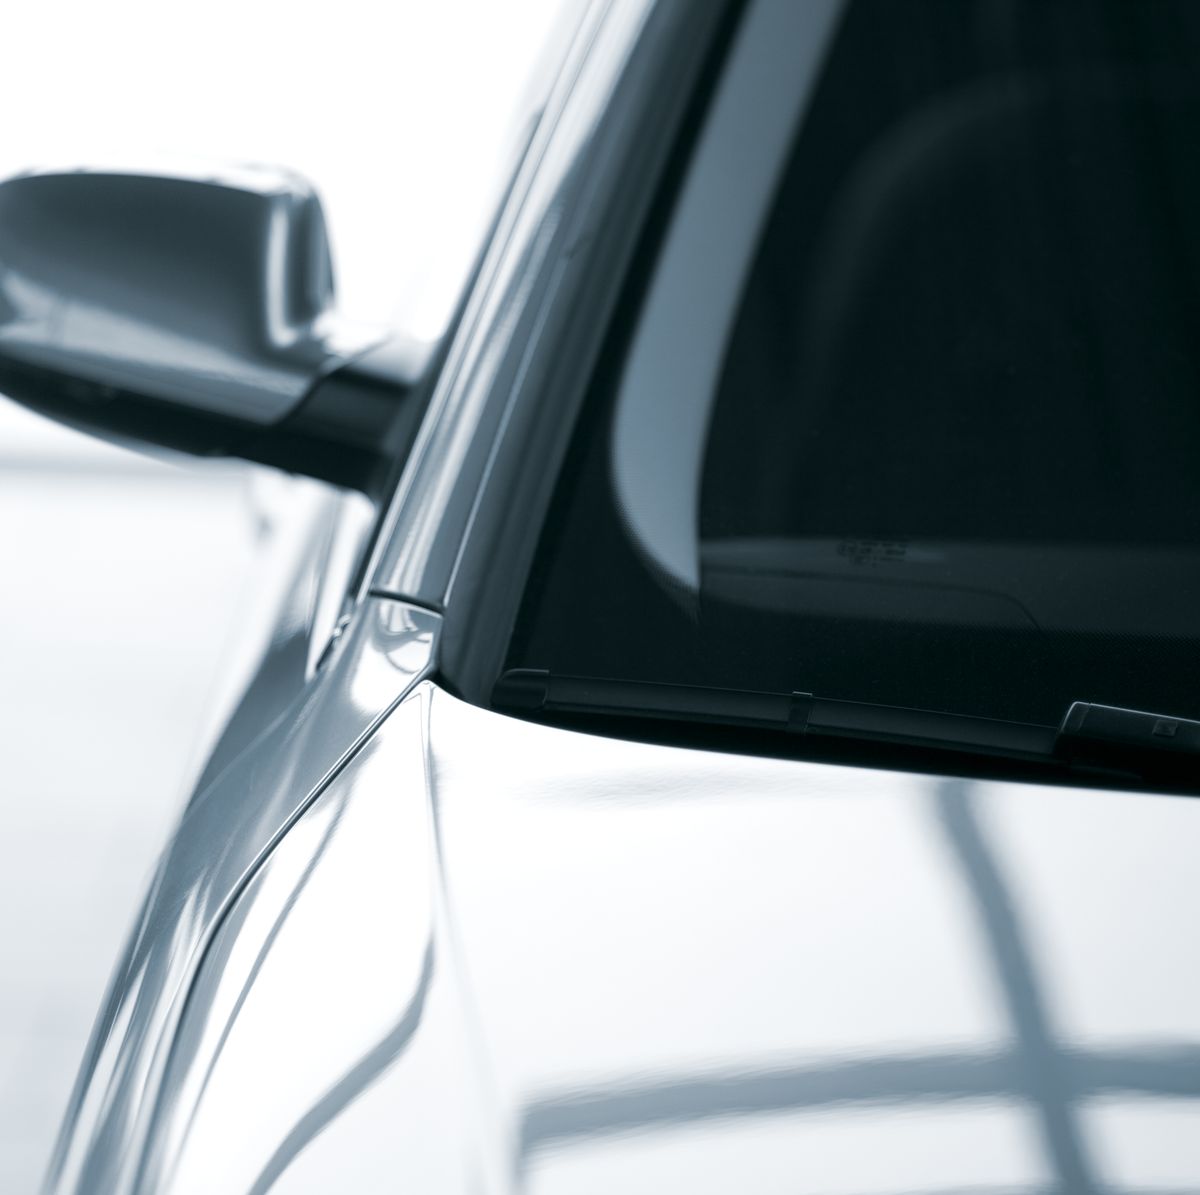 Should I Apply Auto Window Tint to My Vehicle? Top Benefits